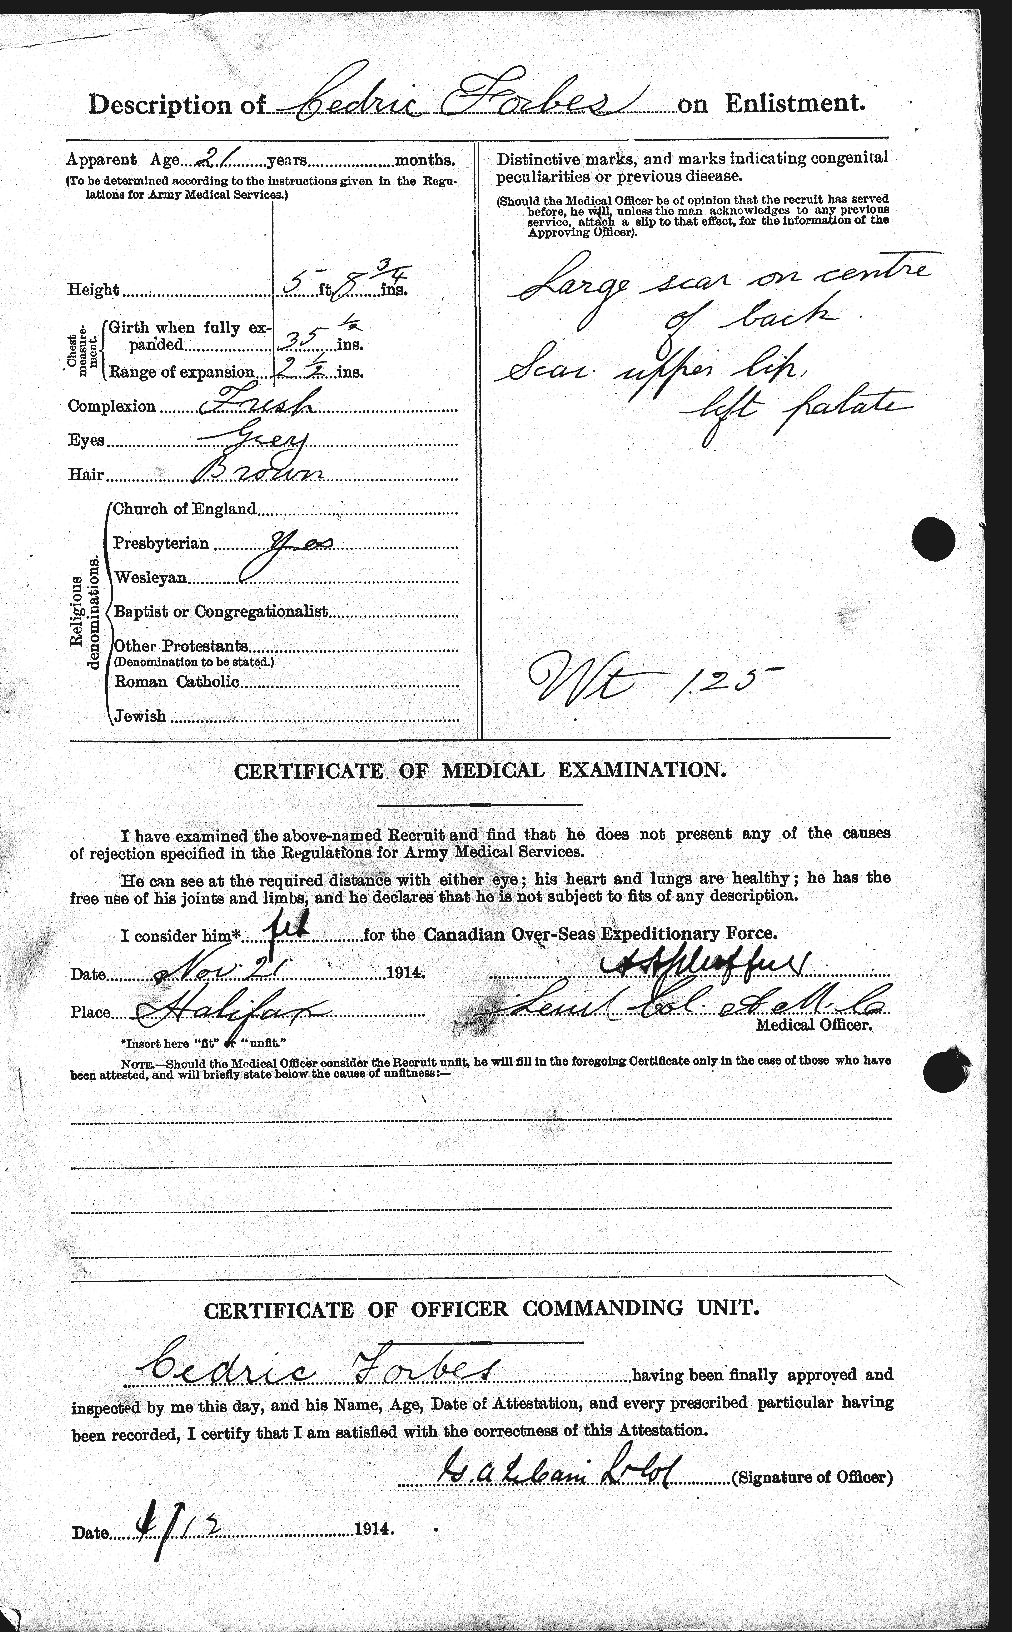 Personnel Records of the First World War - CEF 329939b